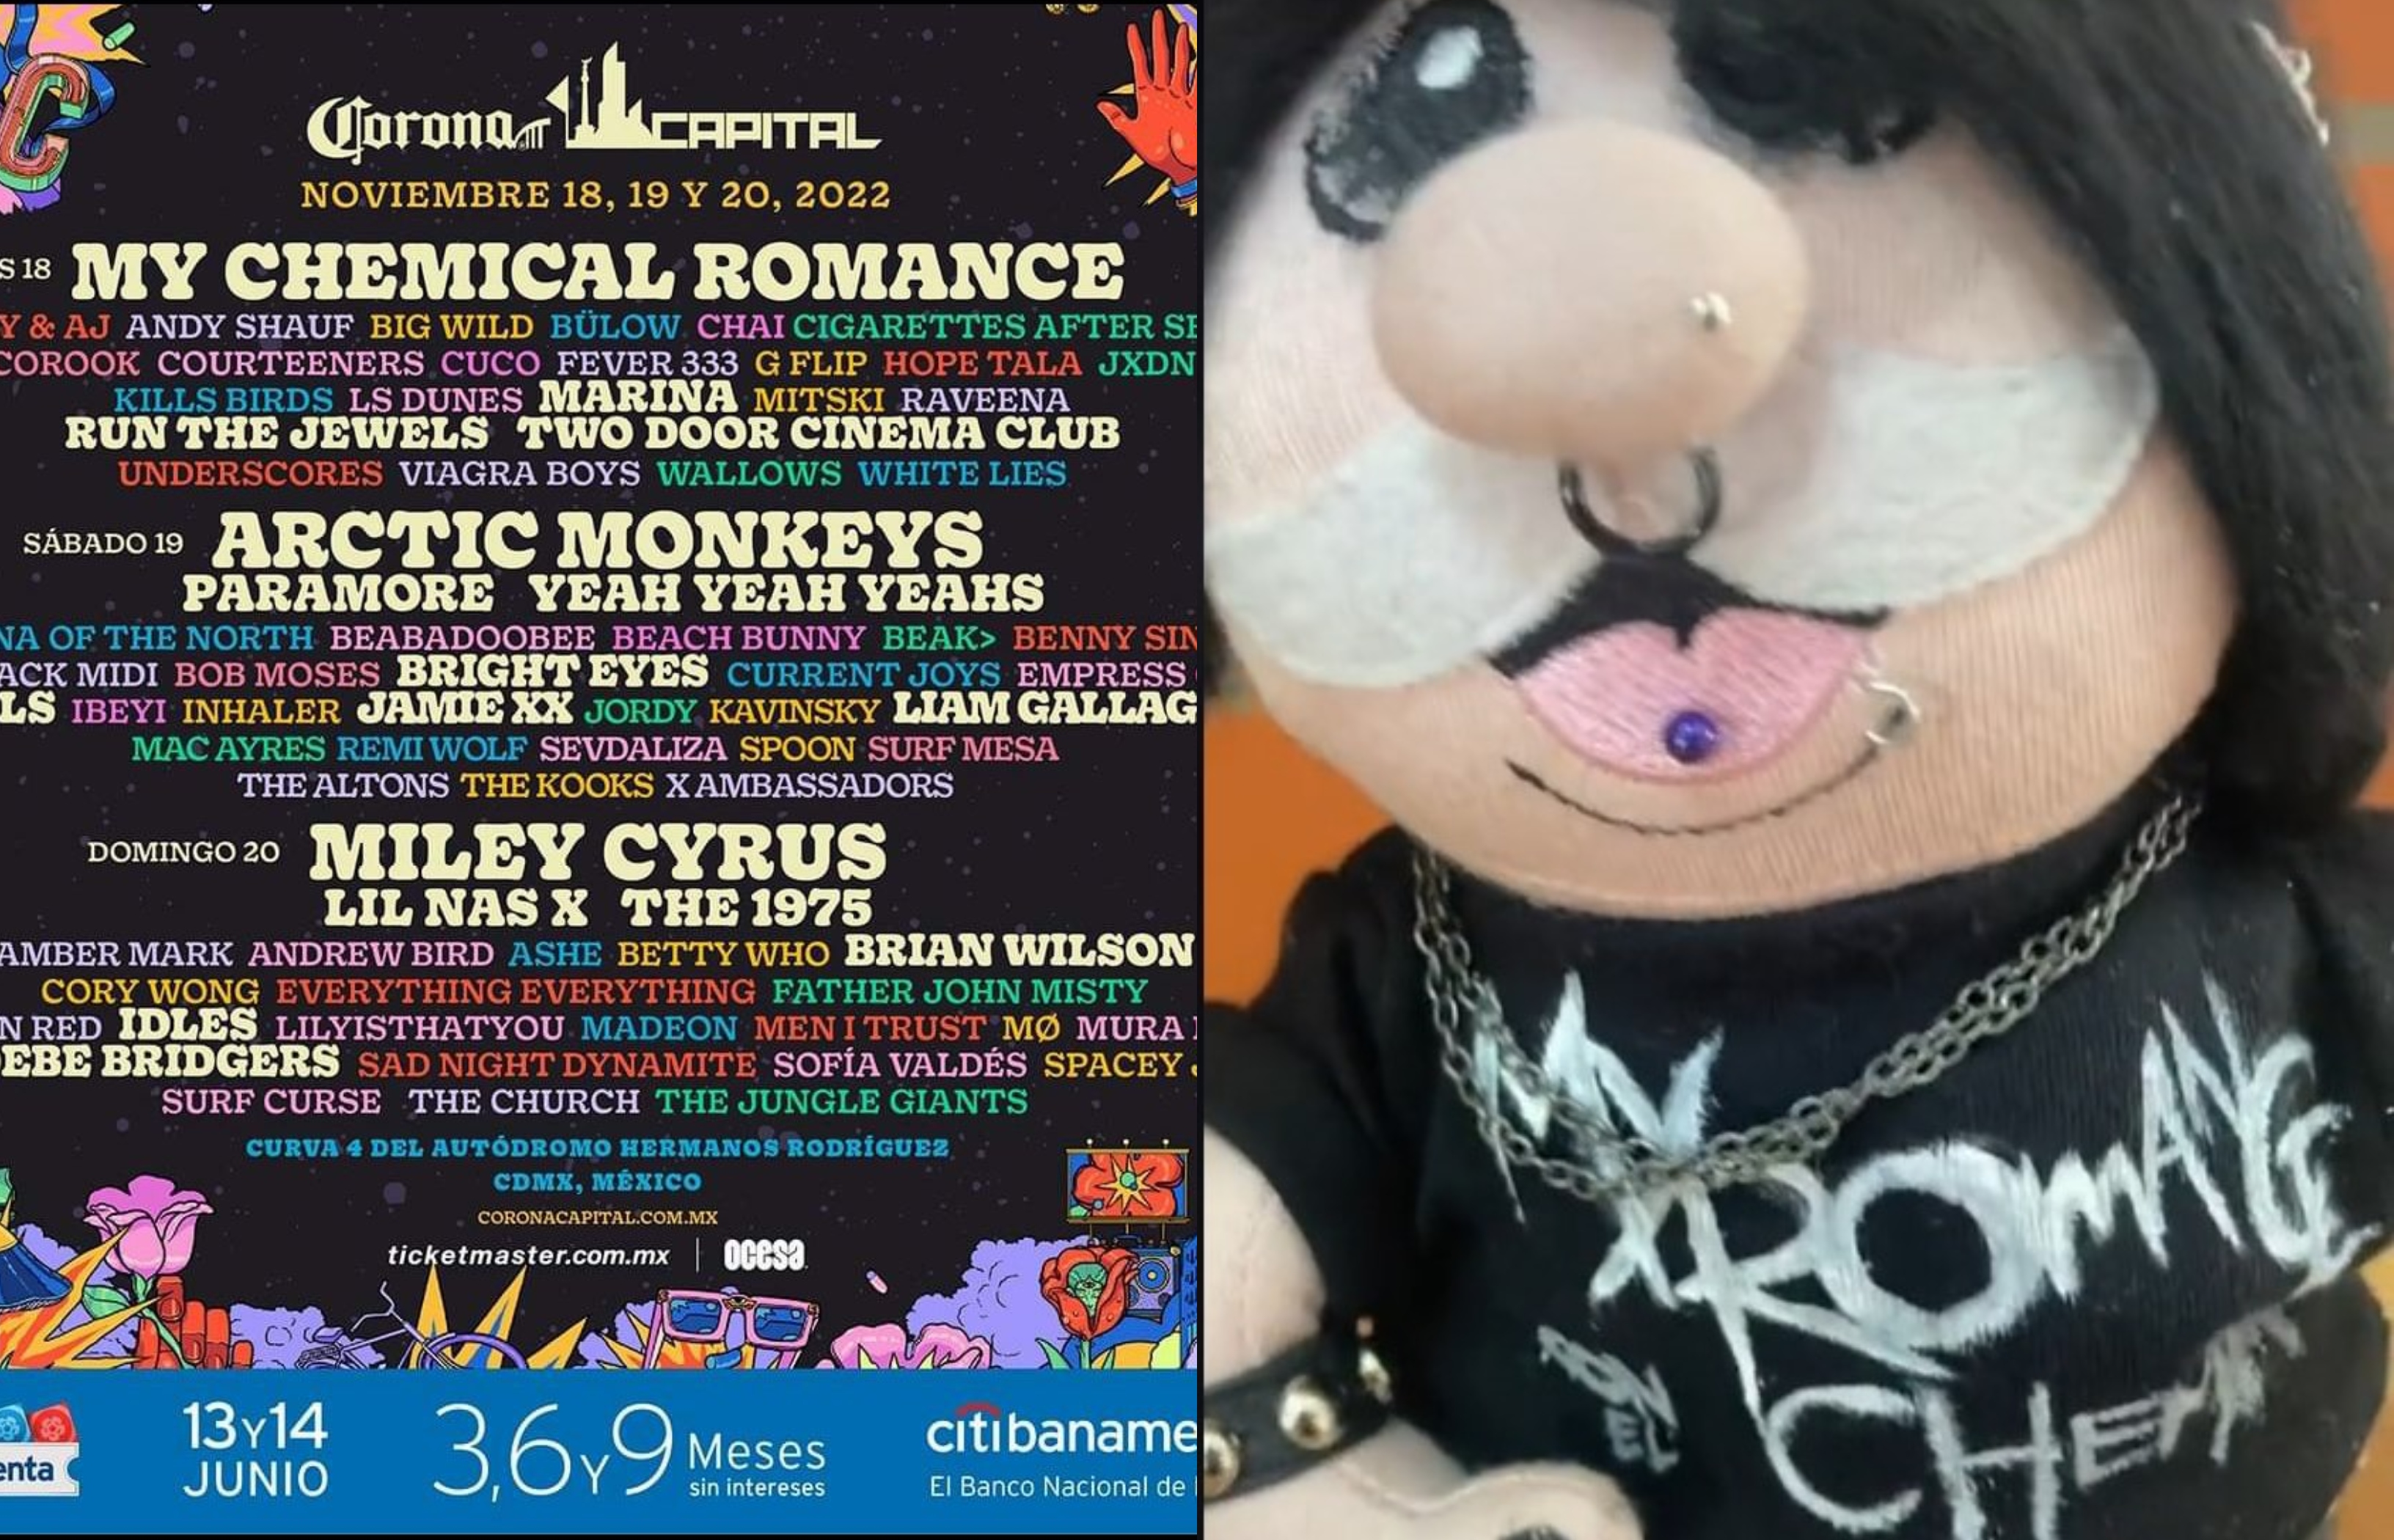 The tradition of throwing stuffed animals onto the stage is already being prepared for the 2022 edition of the Corona Capital festival (Screenshot)